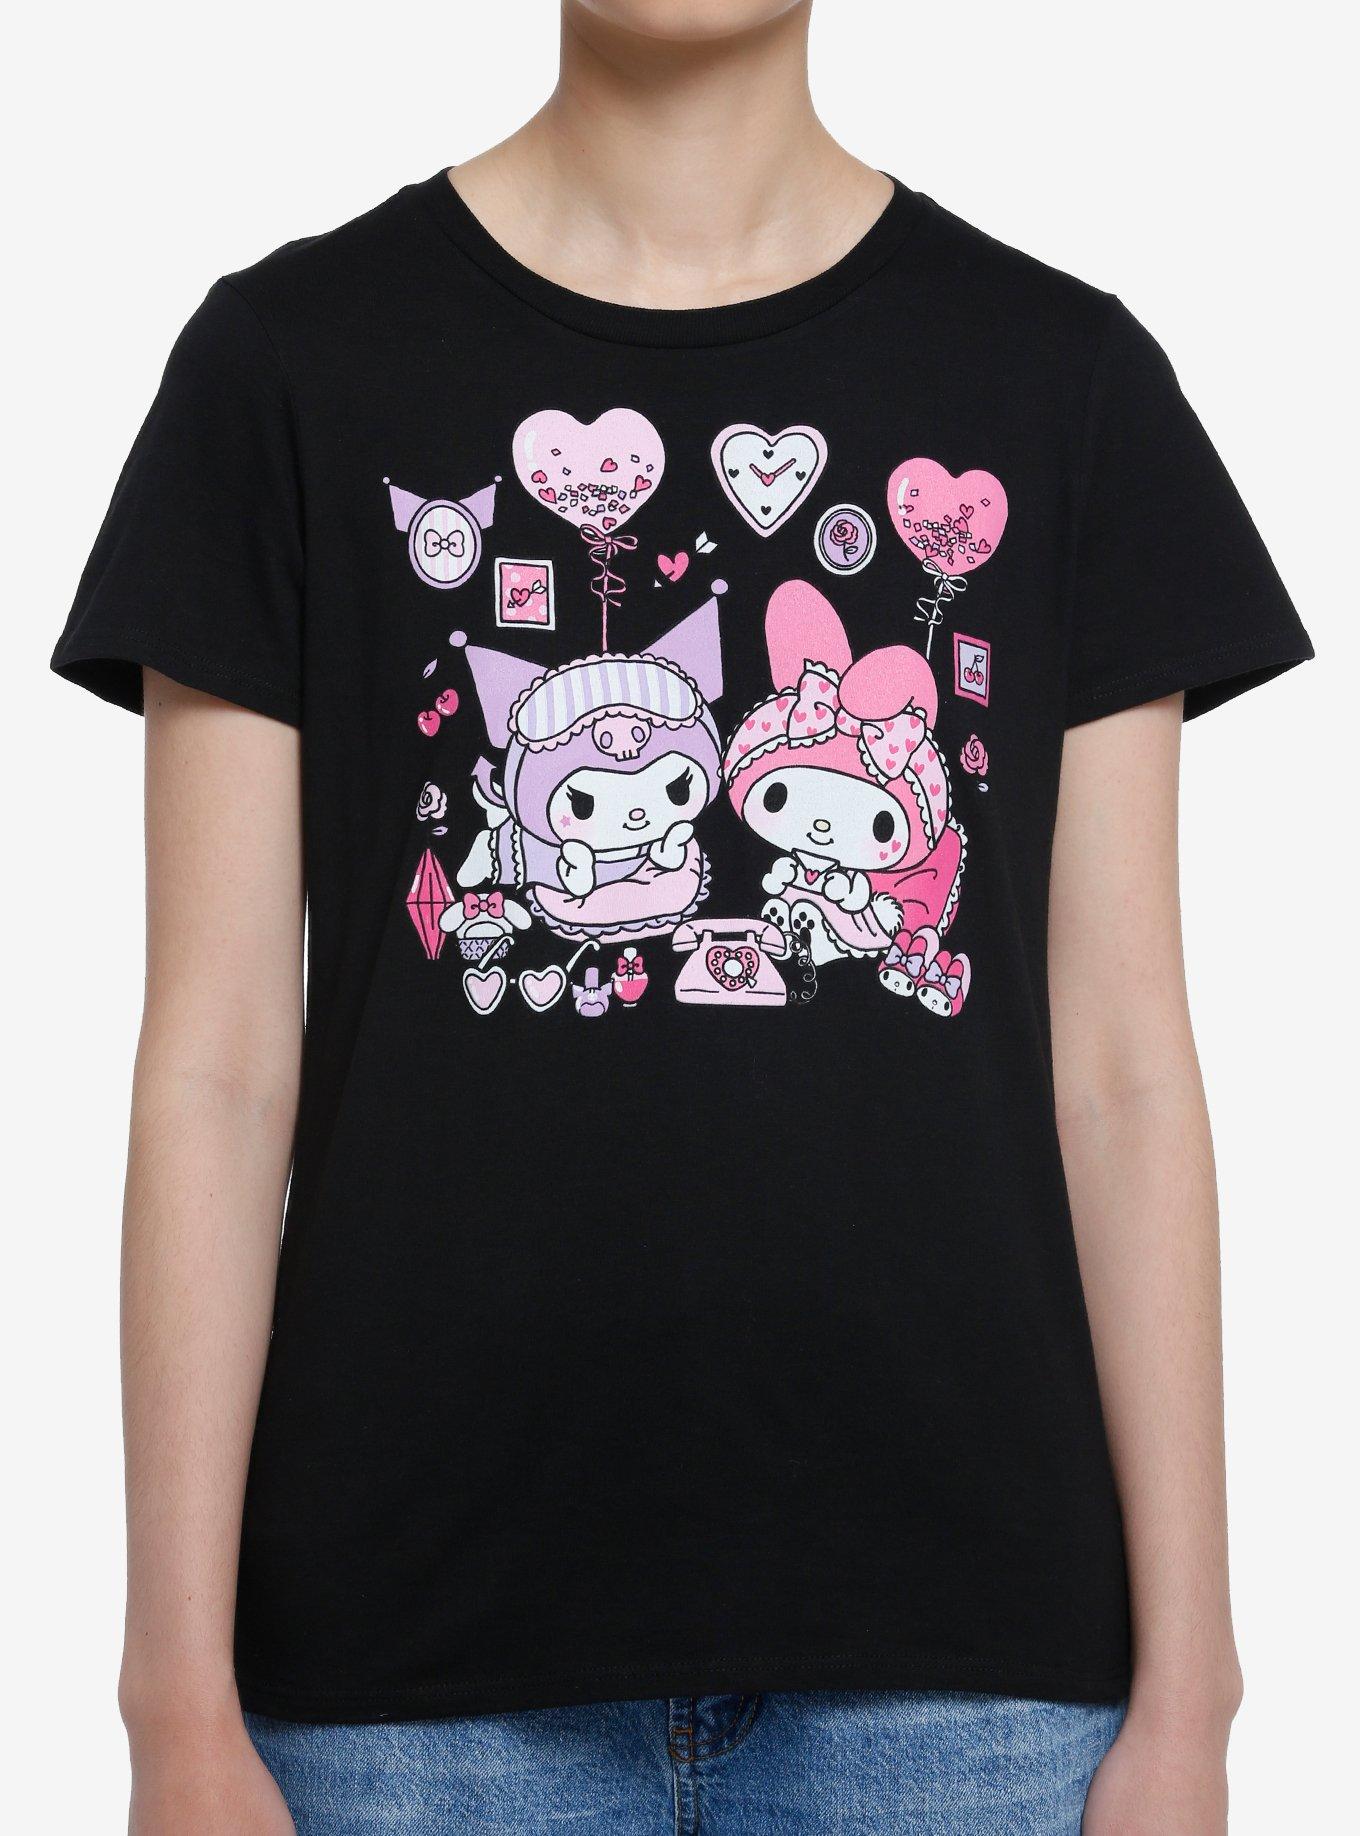 Women's Graphic Tees | Hot Topic